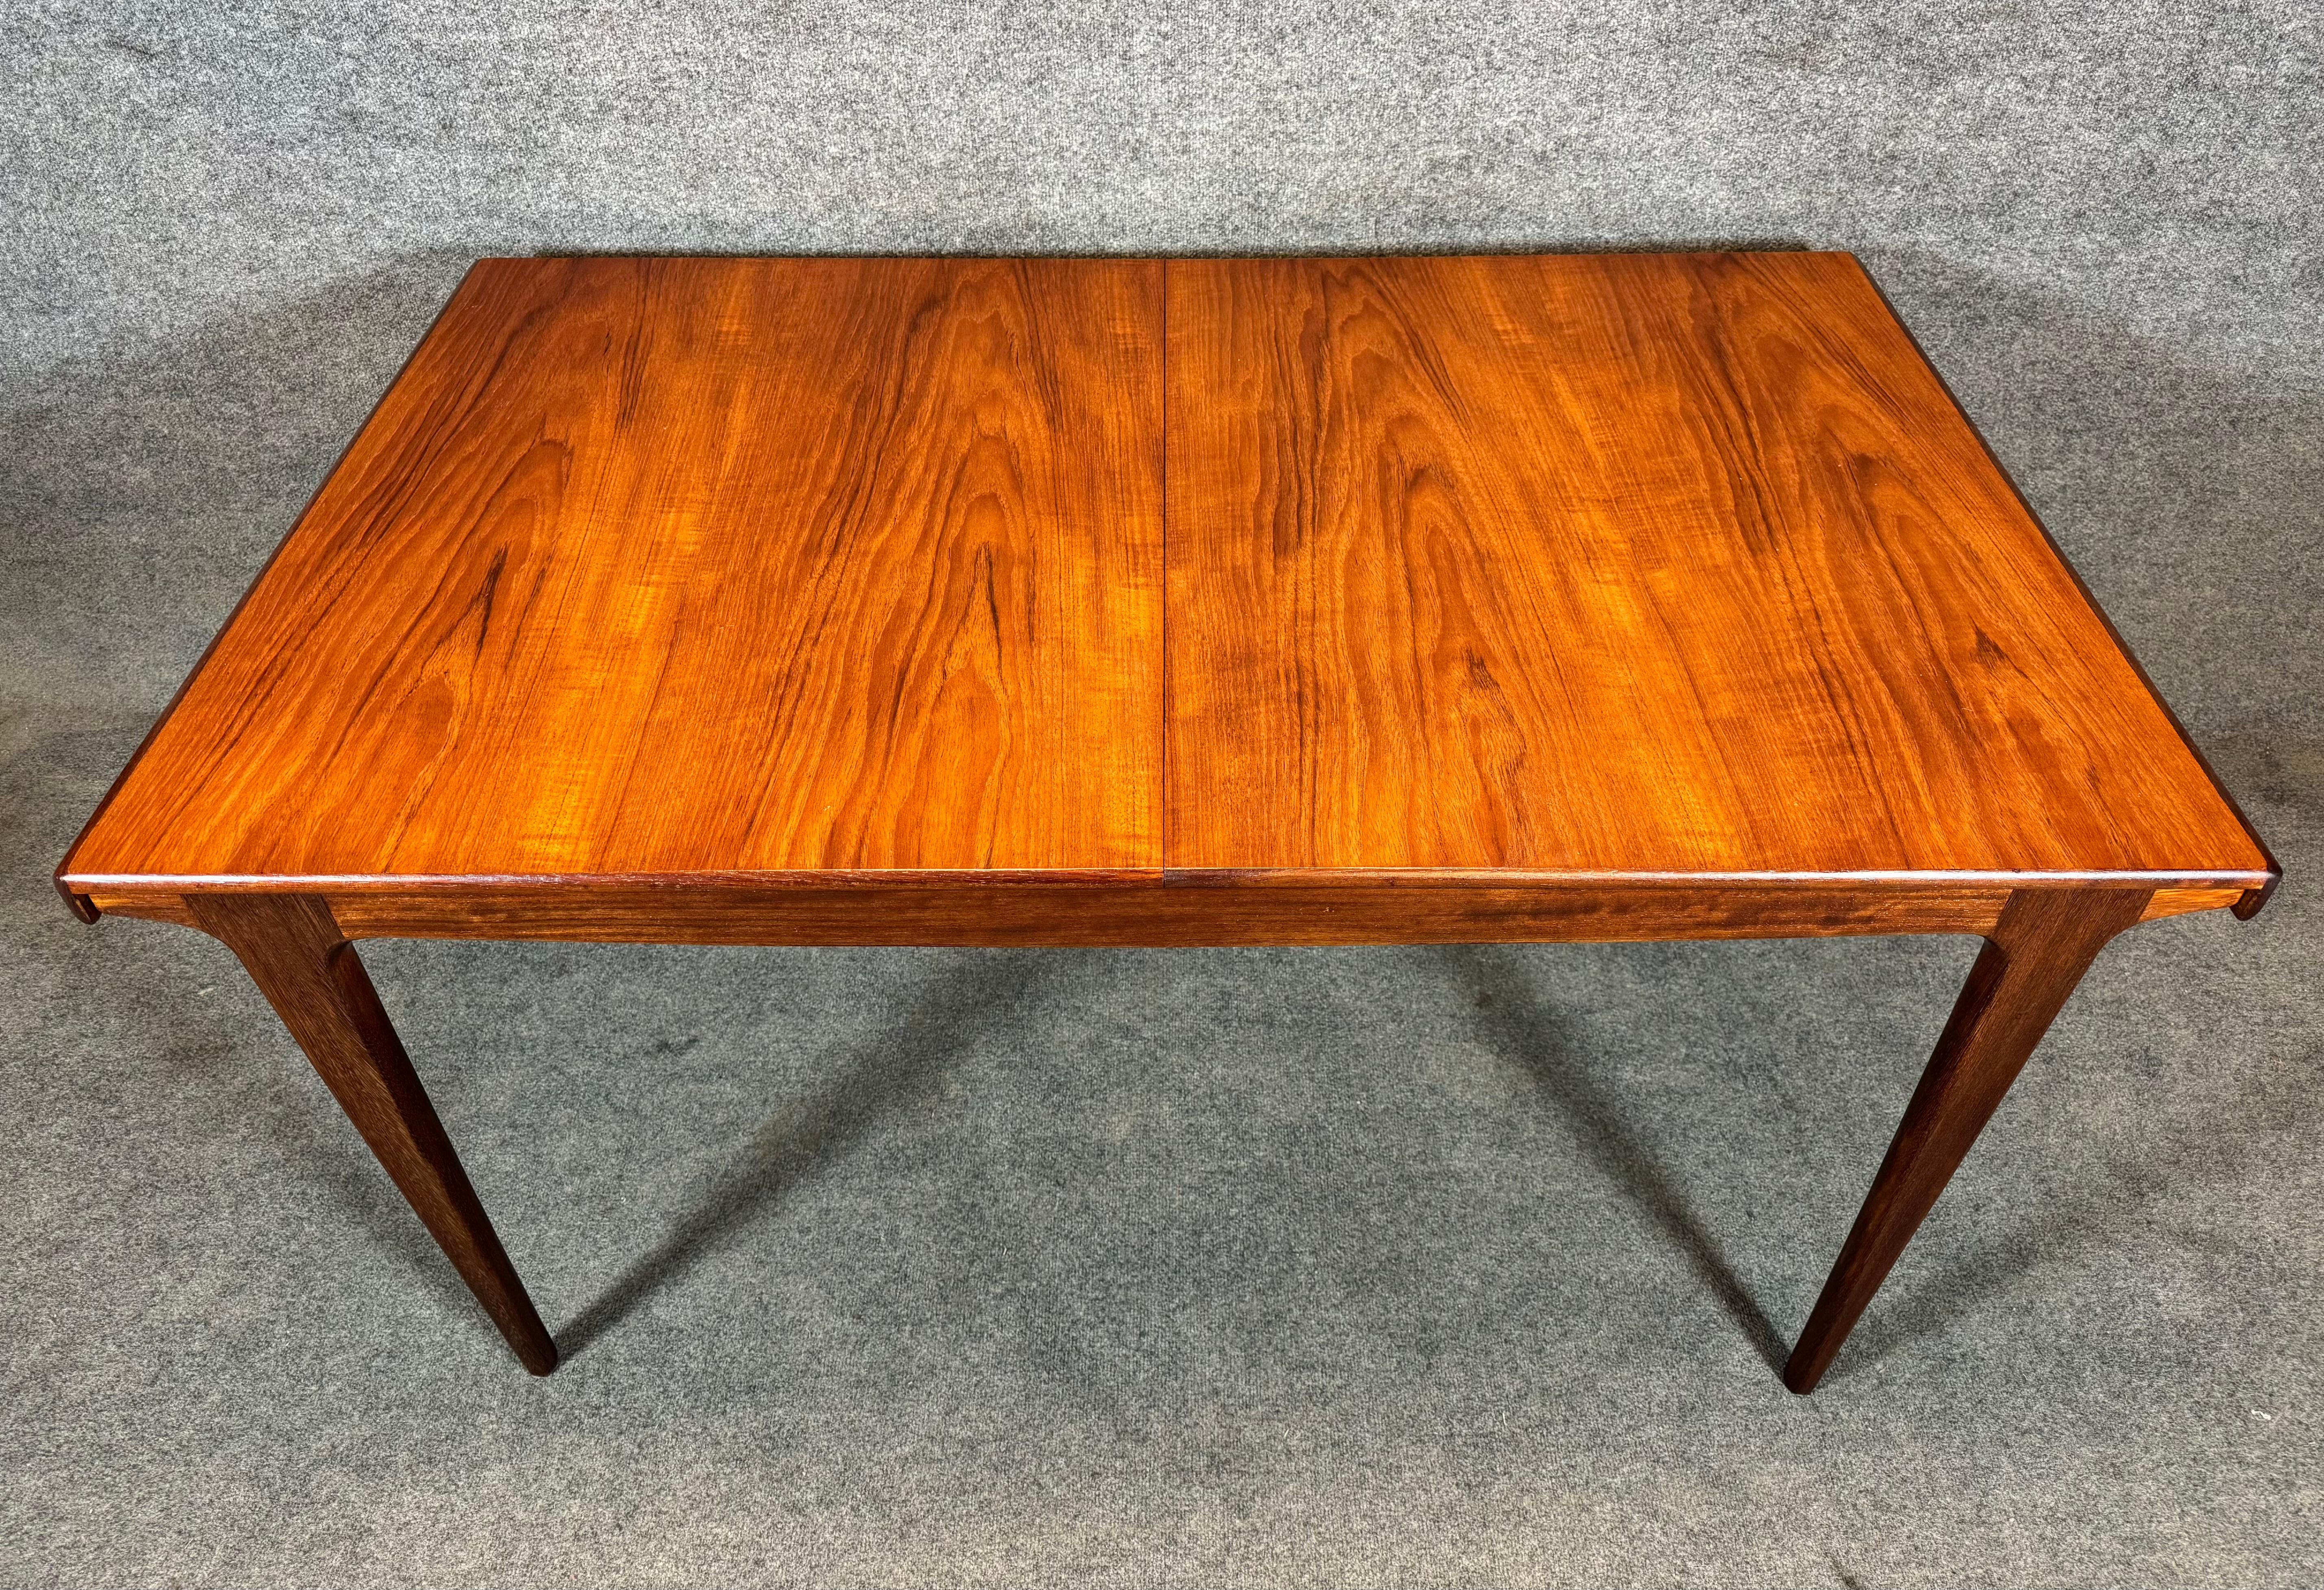 Mid-20th Century Vintage Mid Century Modern Teak Dining Table by John Herbert for A. Younger Ltd. For Sale